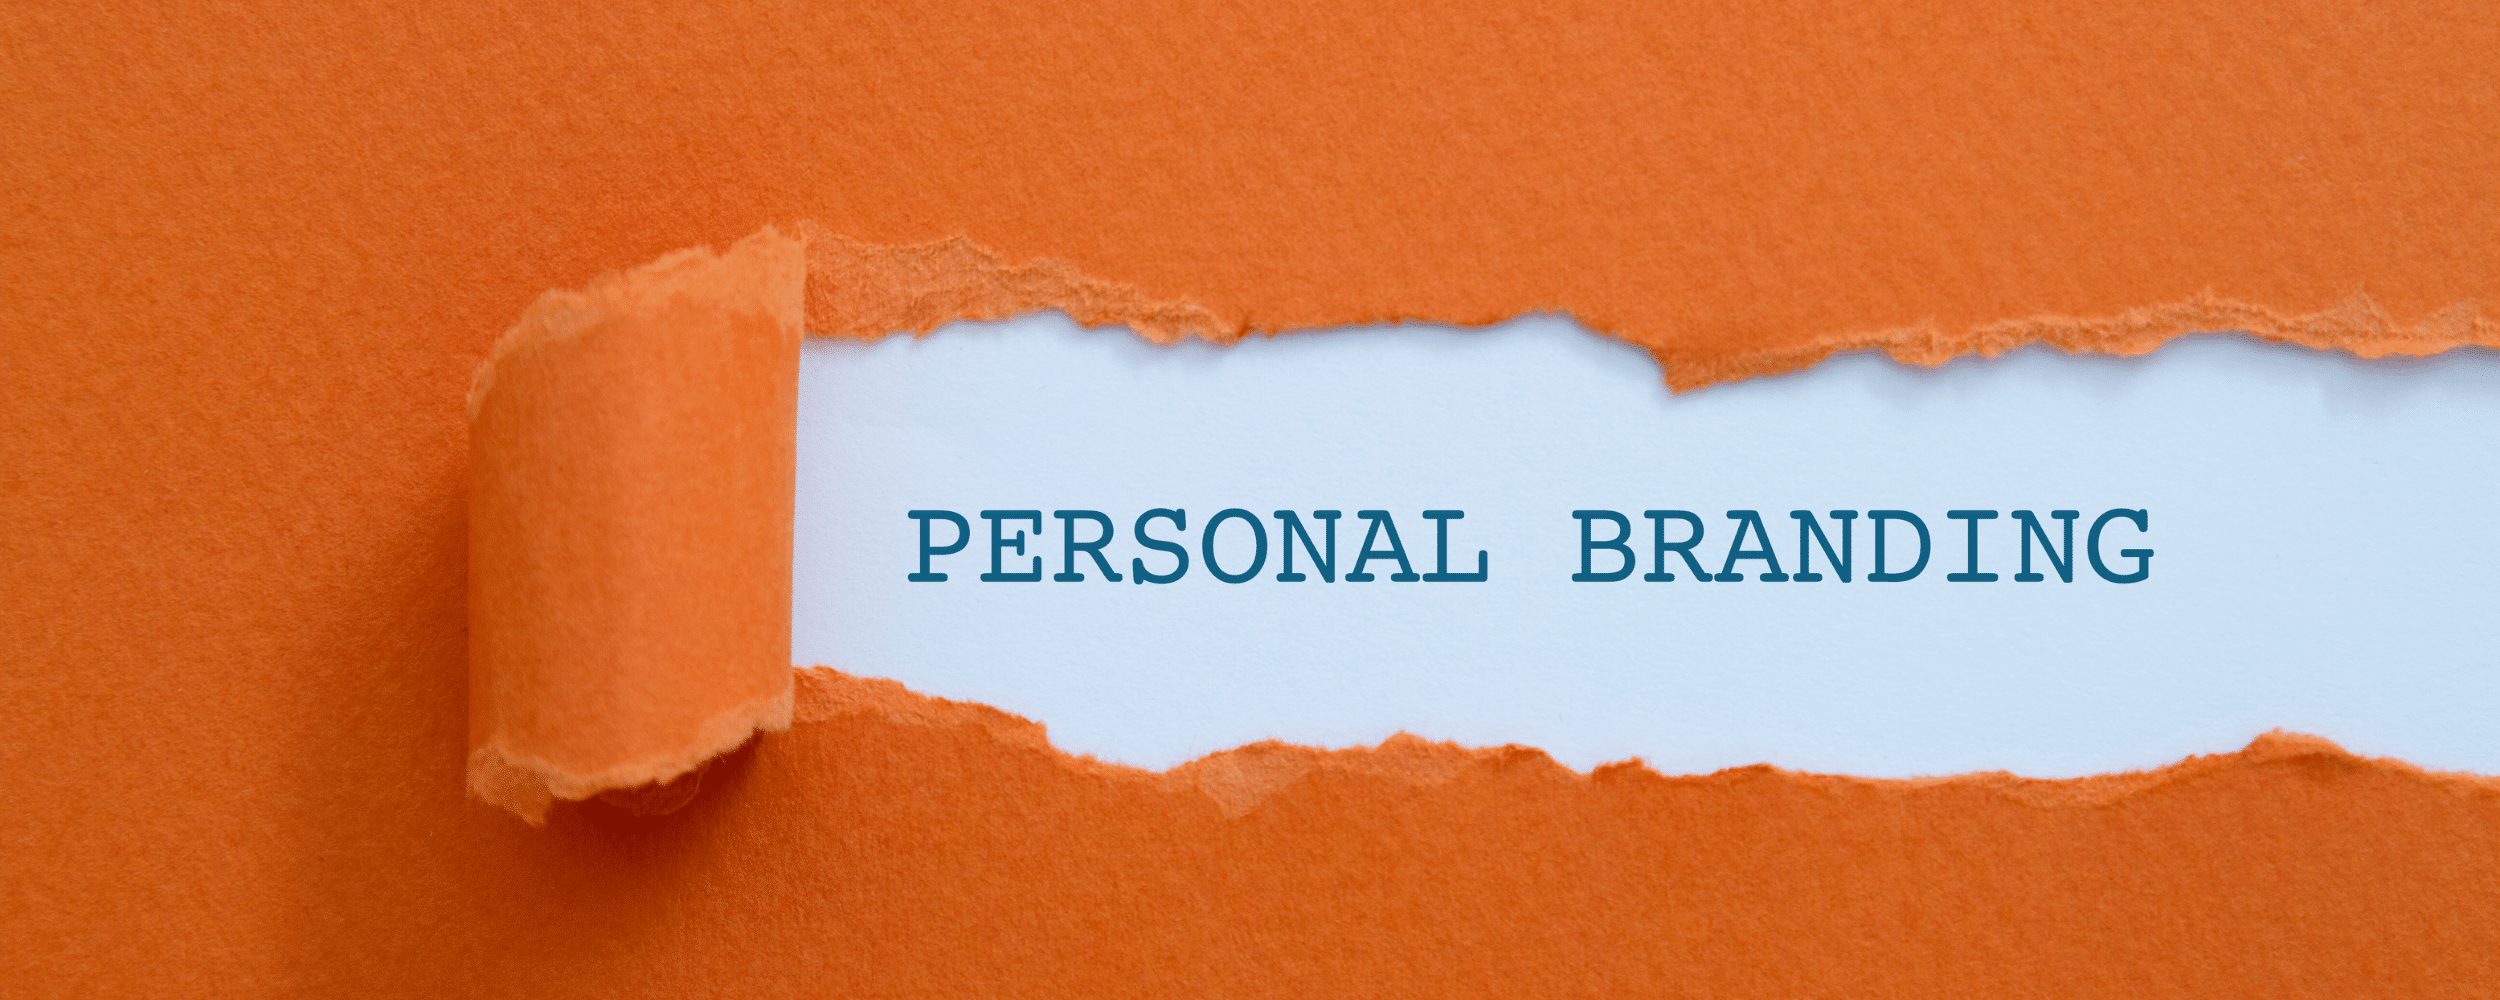 Benefits of Personal Branding Services 